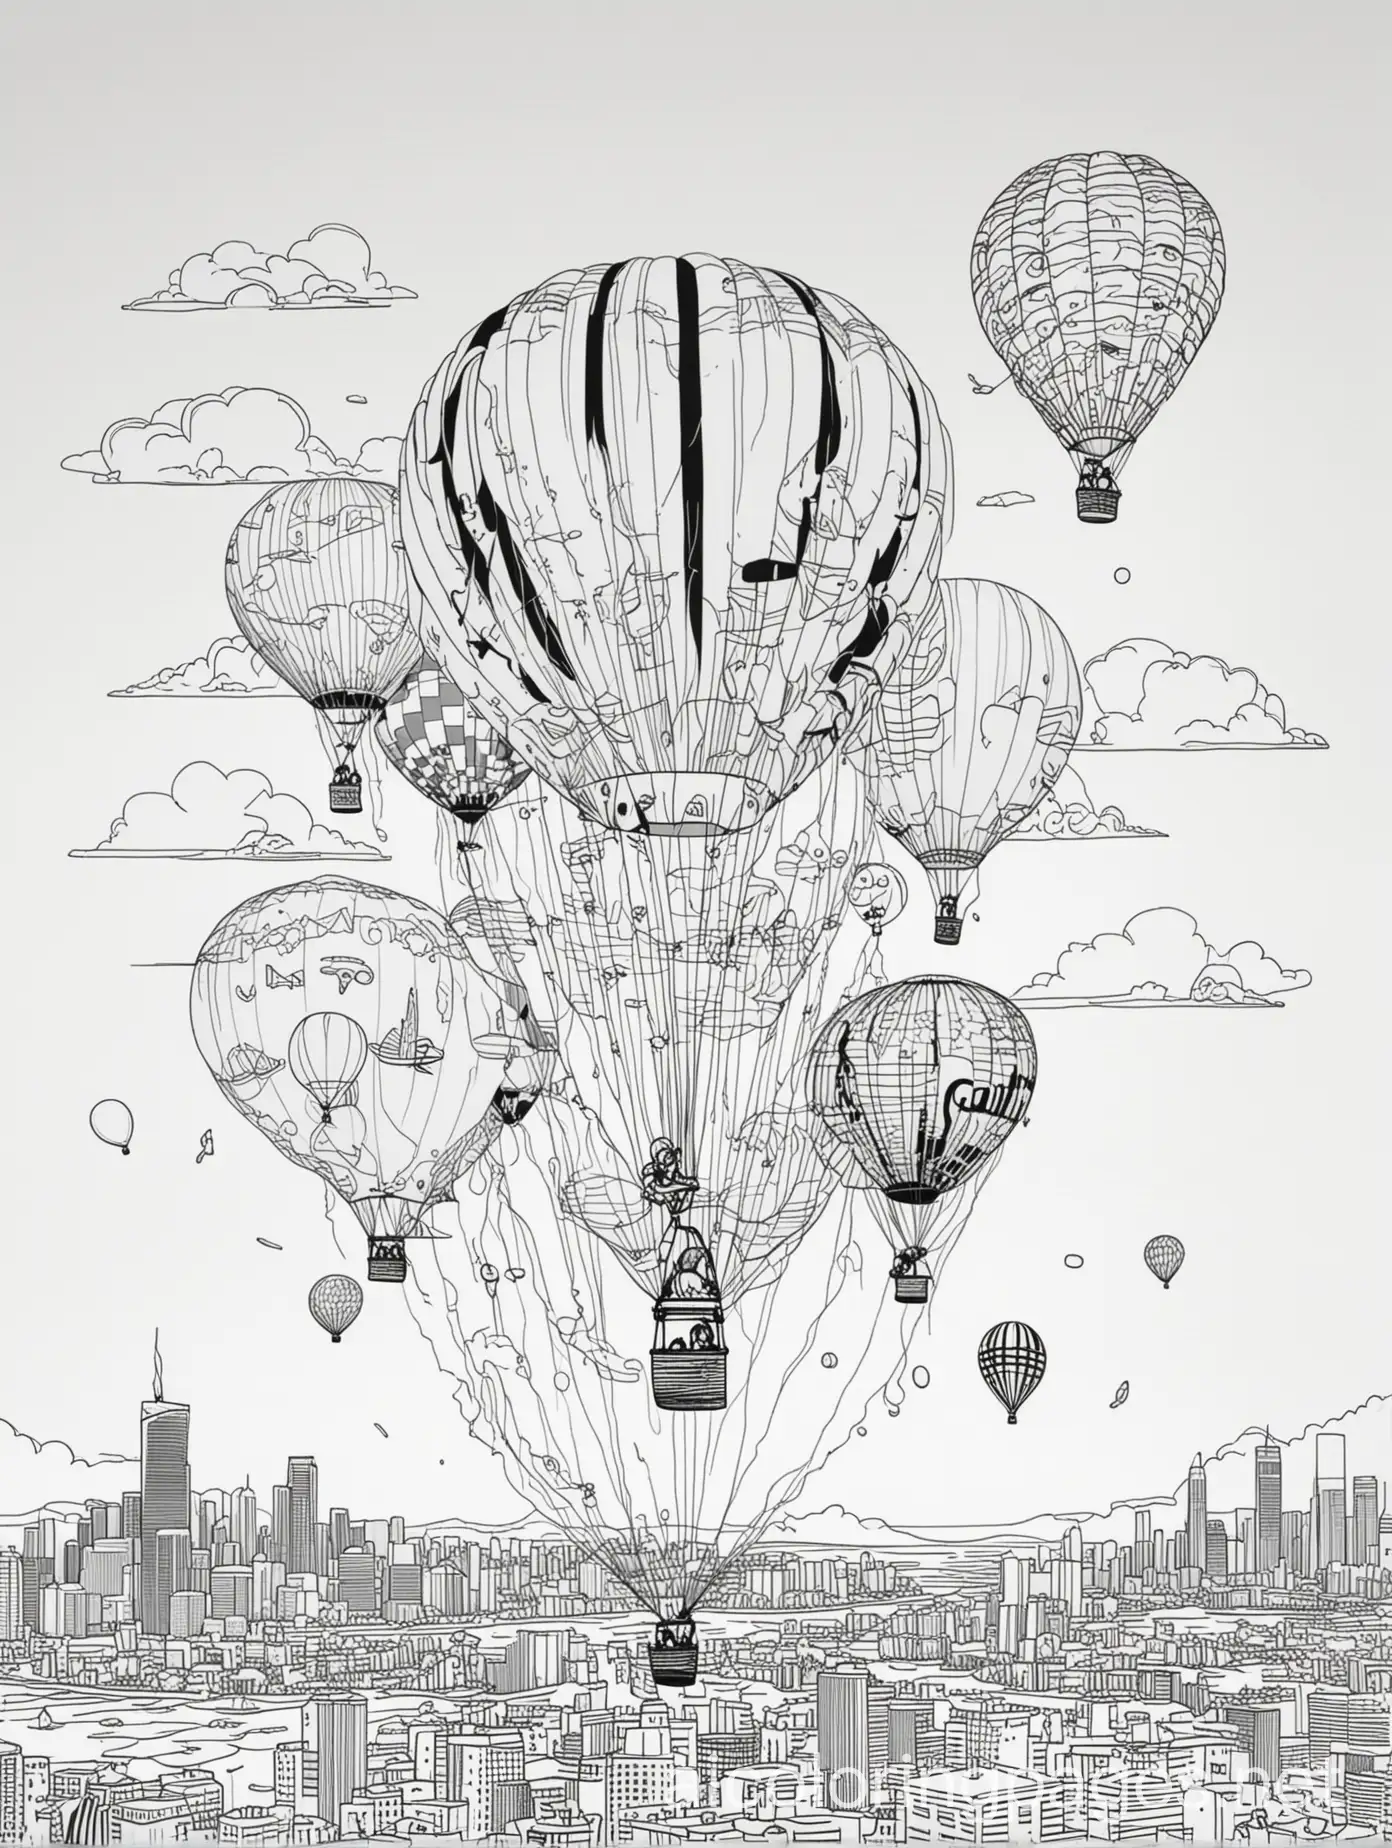 miami city floating on balloons, Coloring Page, black and white, line art, white background, Simplicity, Ample White Space. The background of the coloring page is plain white to make it easy for young children to color within the lines. The outlines of all the subjects are easy to distinguish, making it simple for kids to color without too much difficulty